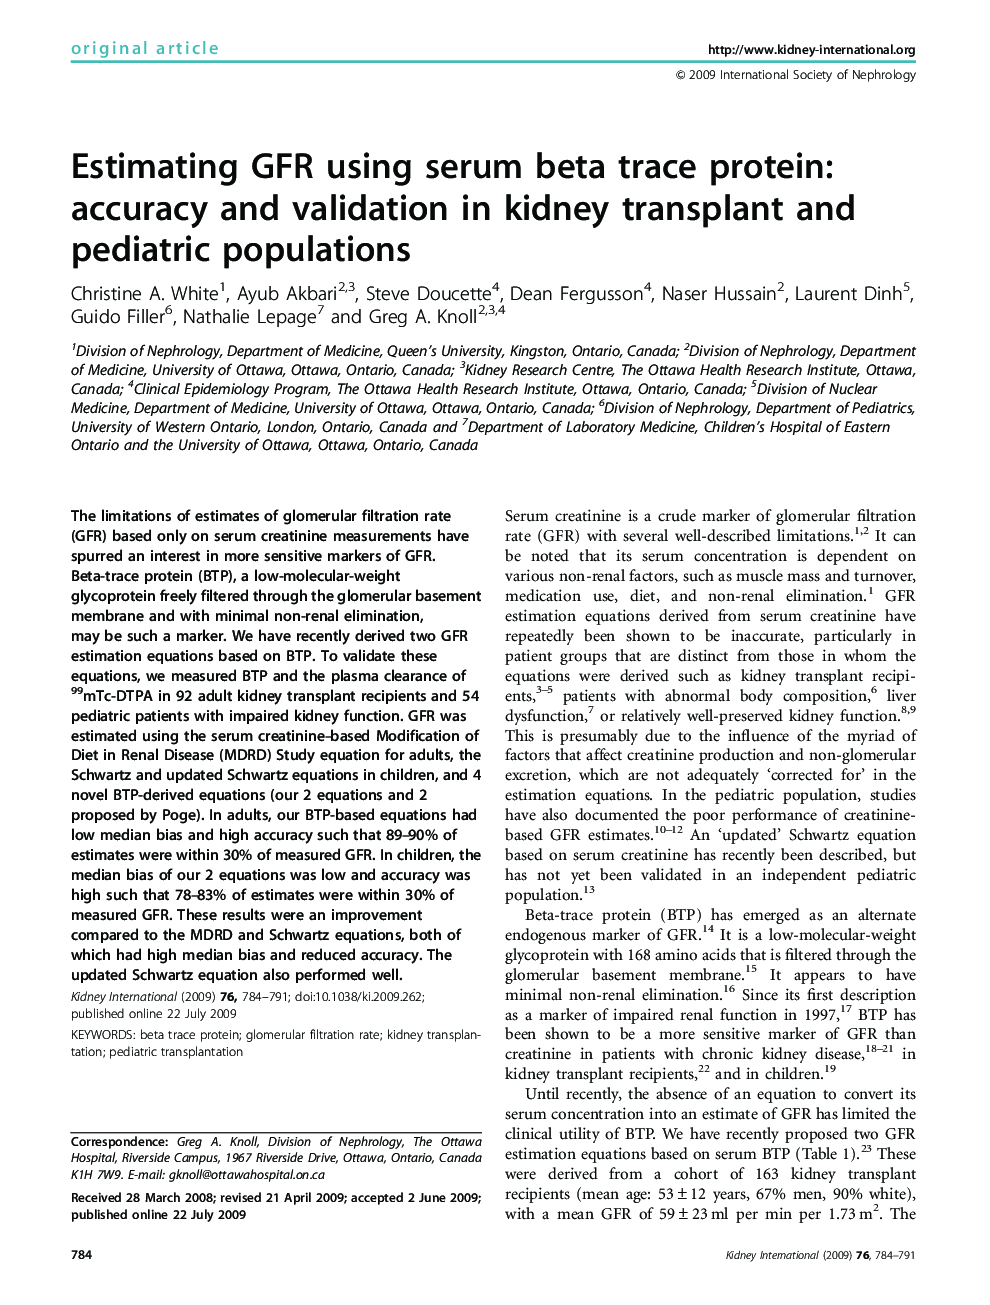 Estimating GFR using serum beta trace protein: accuracy and validation in kidney transplant and pediatric populations